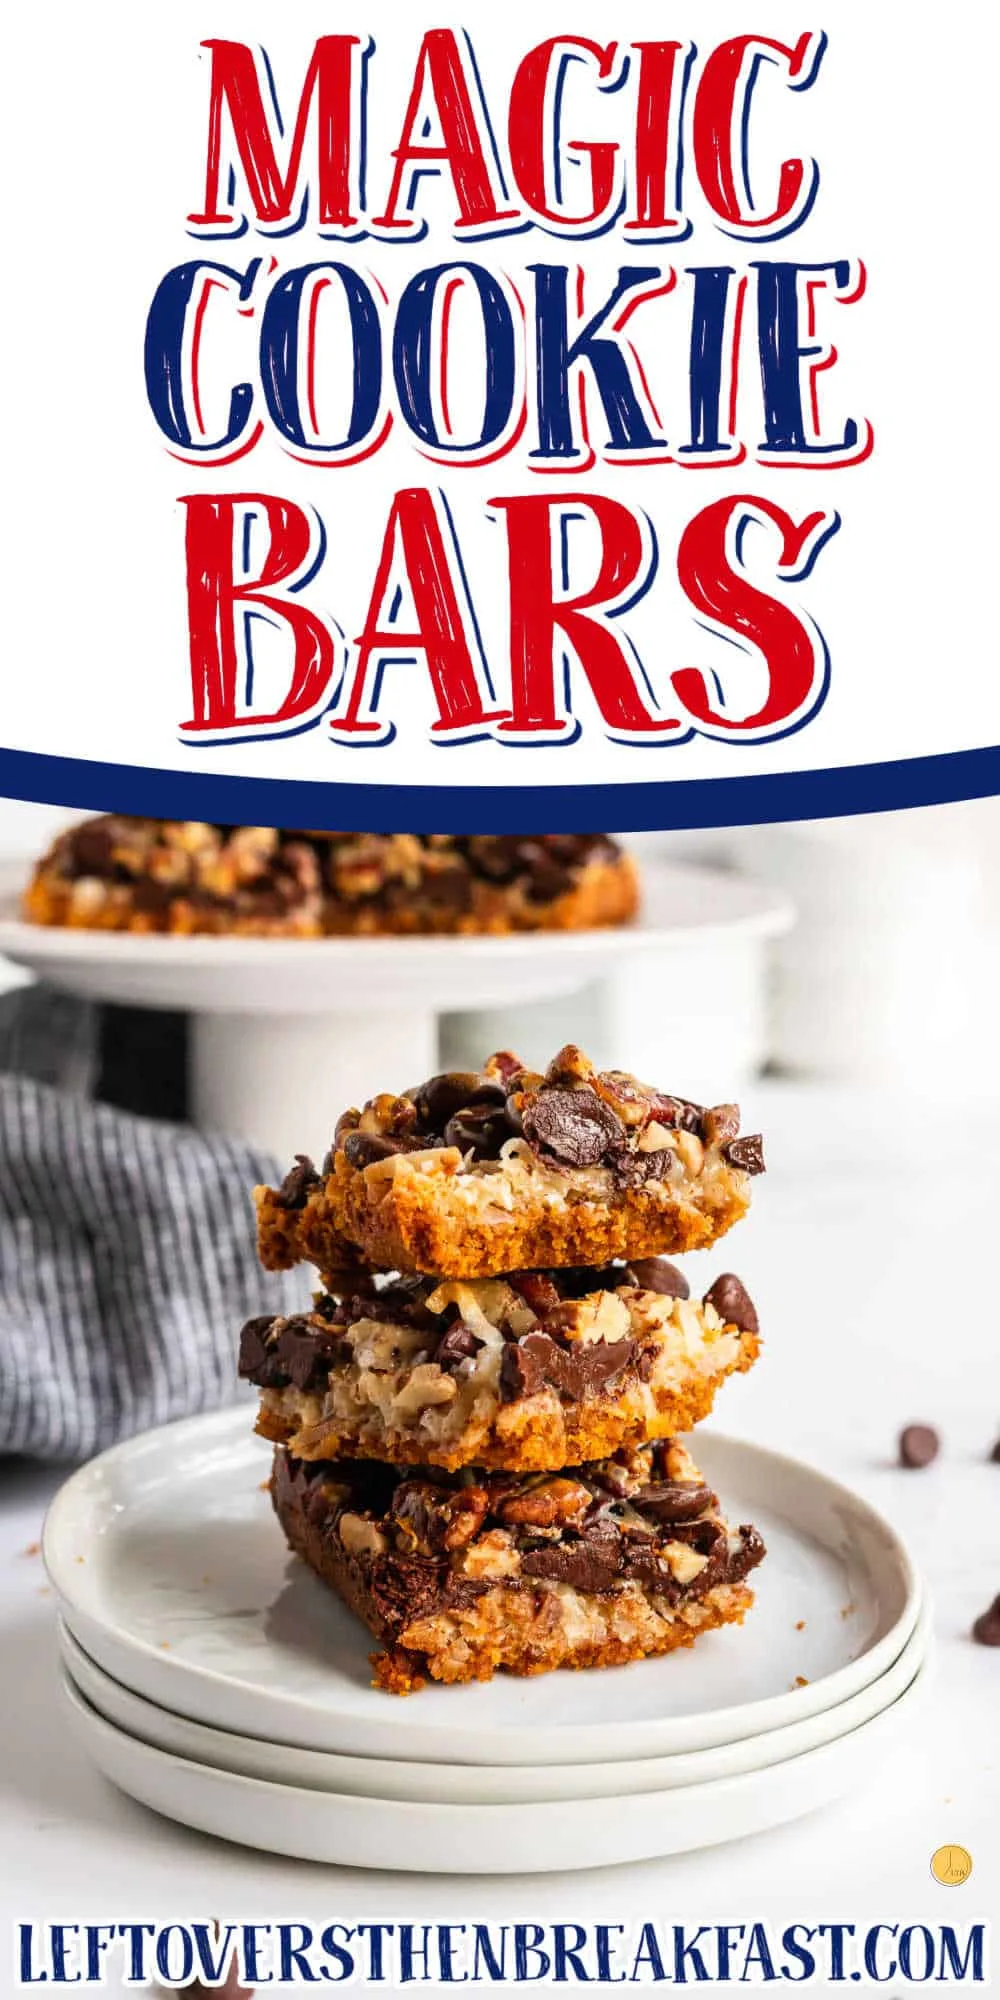 stack of bar with text "magic cookie bars"